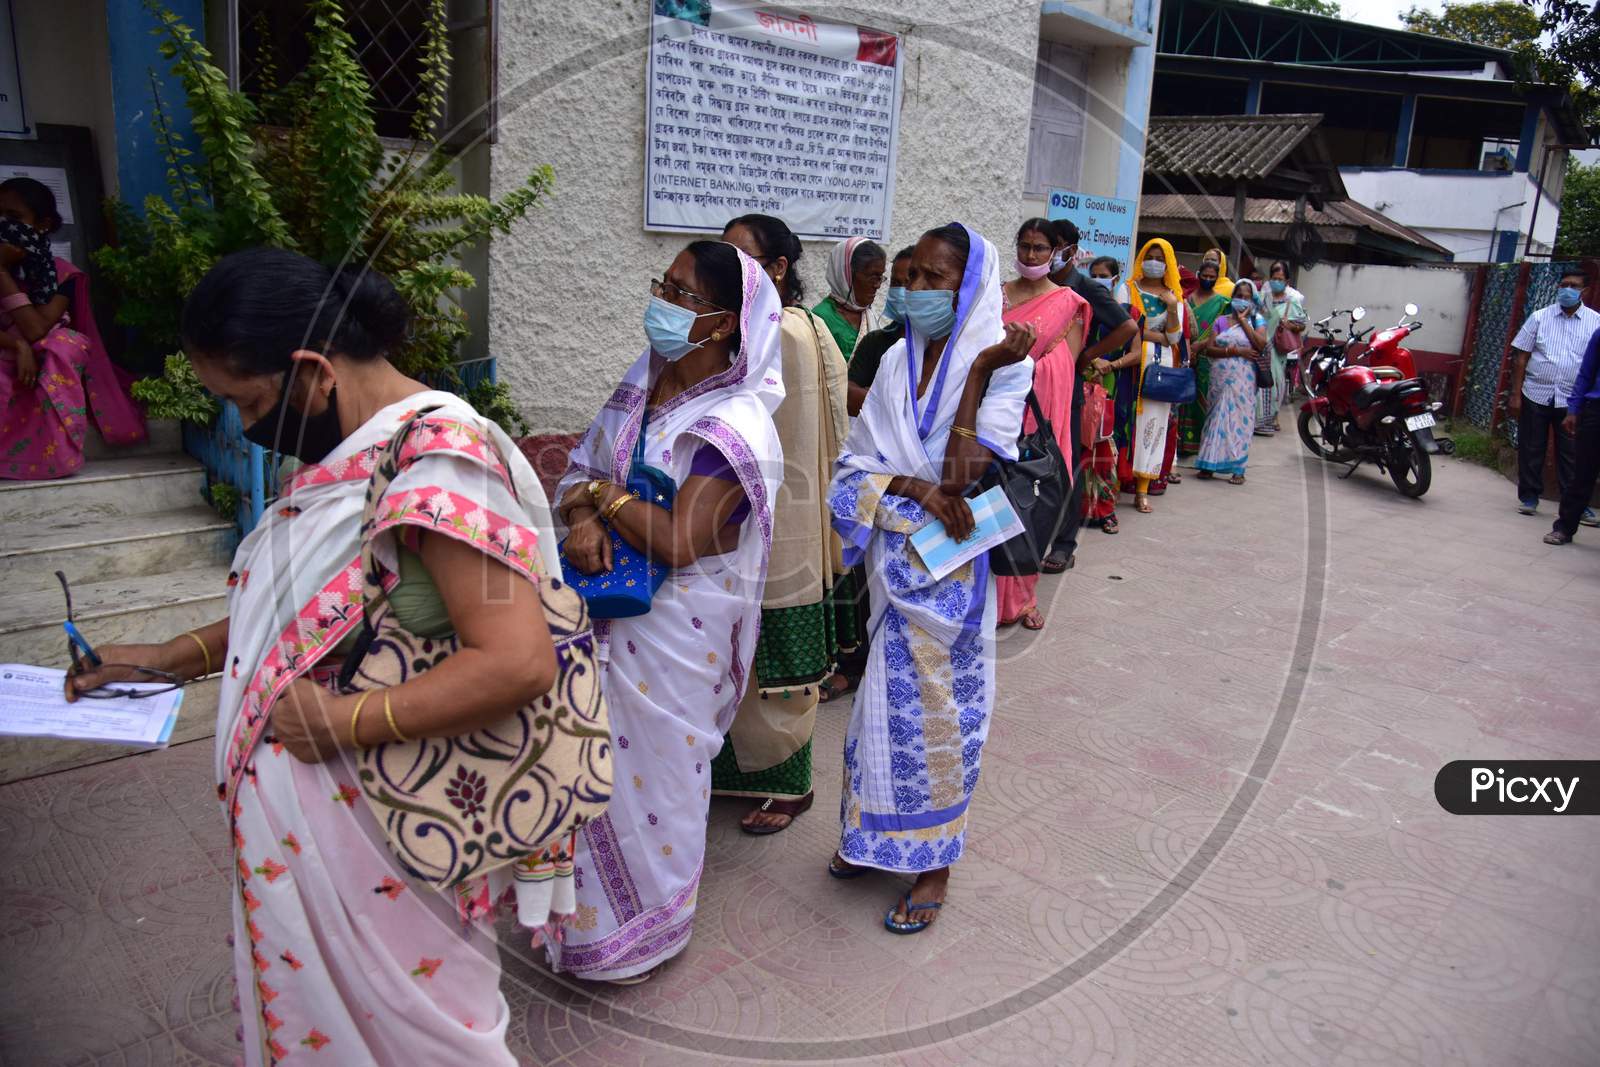 Nagaon : People Stand In A Queue Outside A Sbi Bank During The Ongoing Covid-19 Nationwide Lockdown In Nagaon District Of Assam On May 4,2020.Pix By Anuwar Hazarika